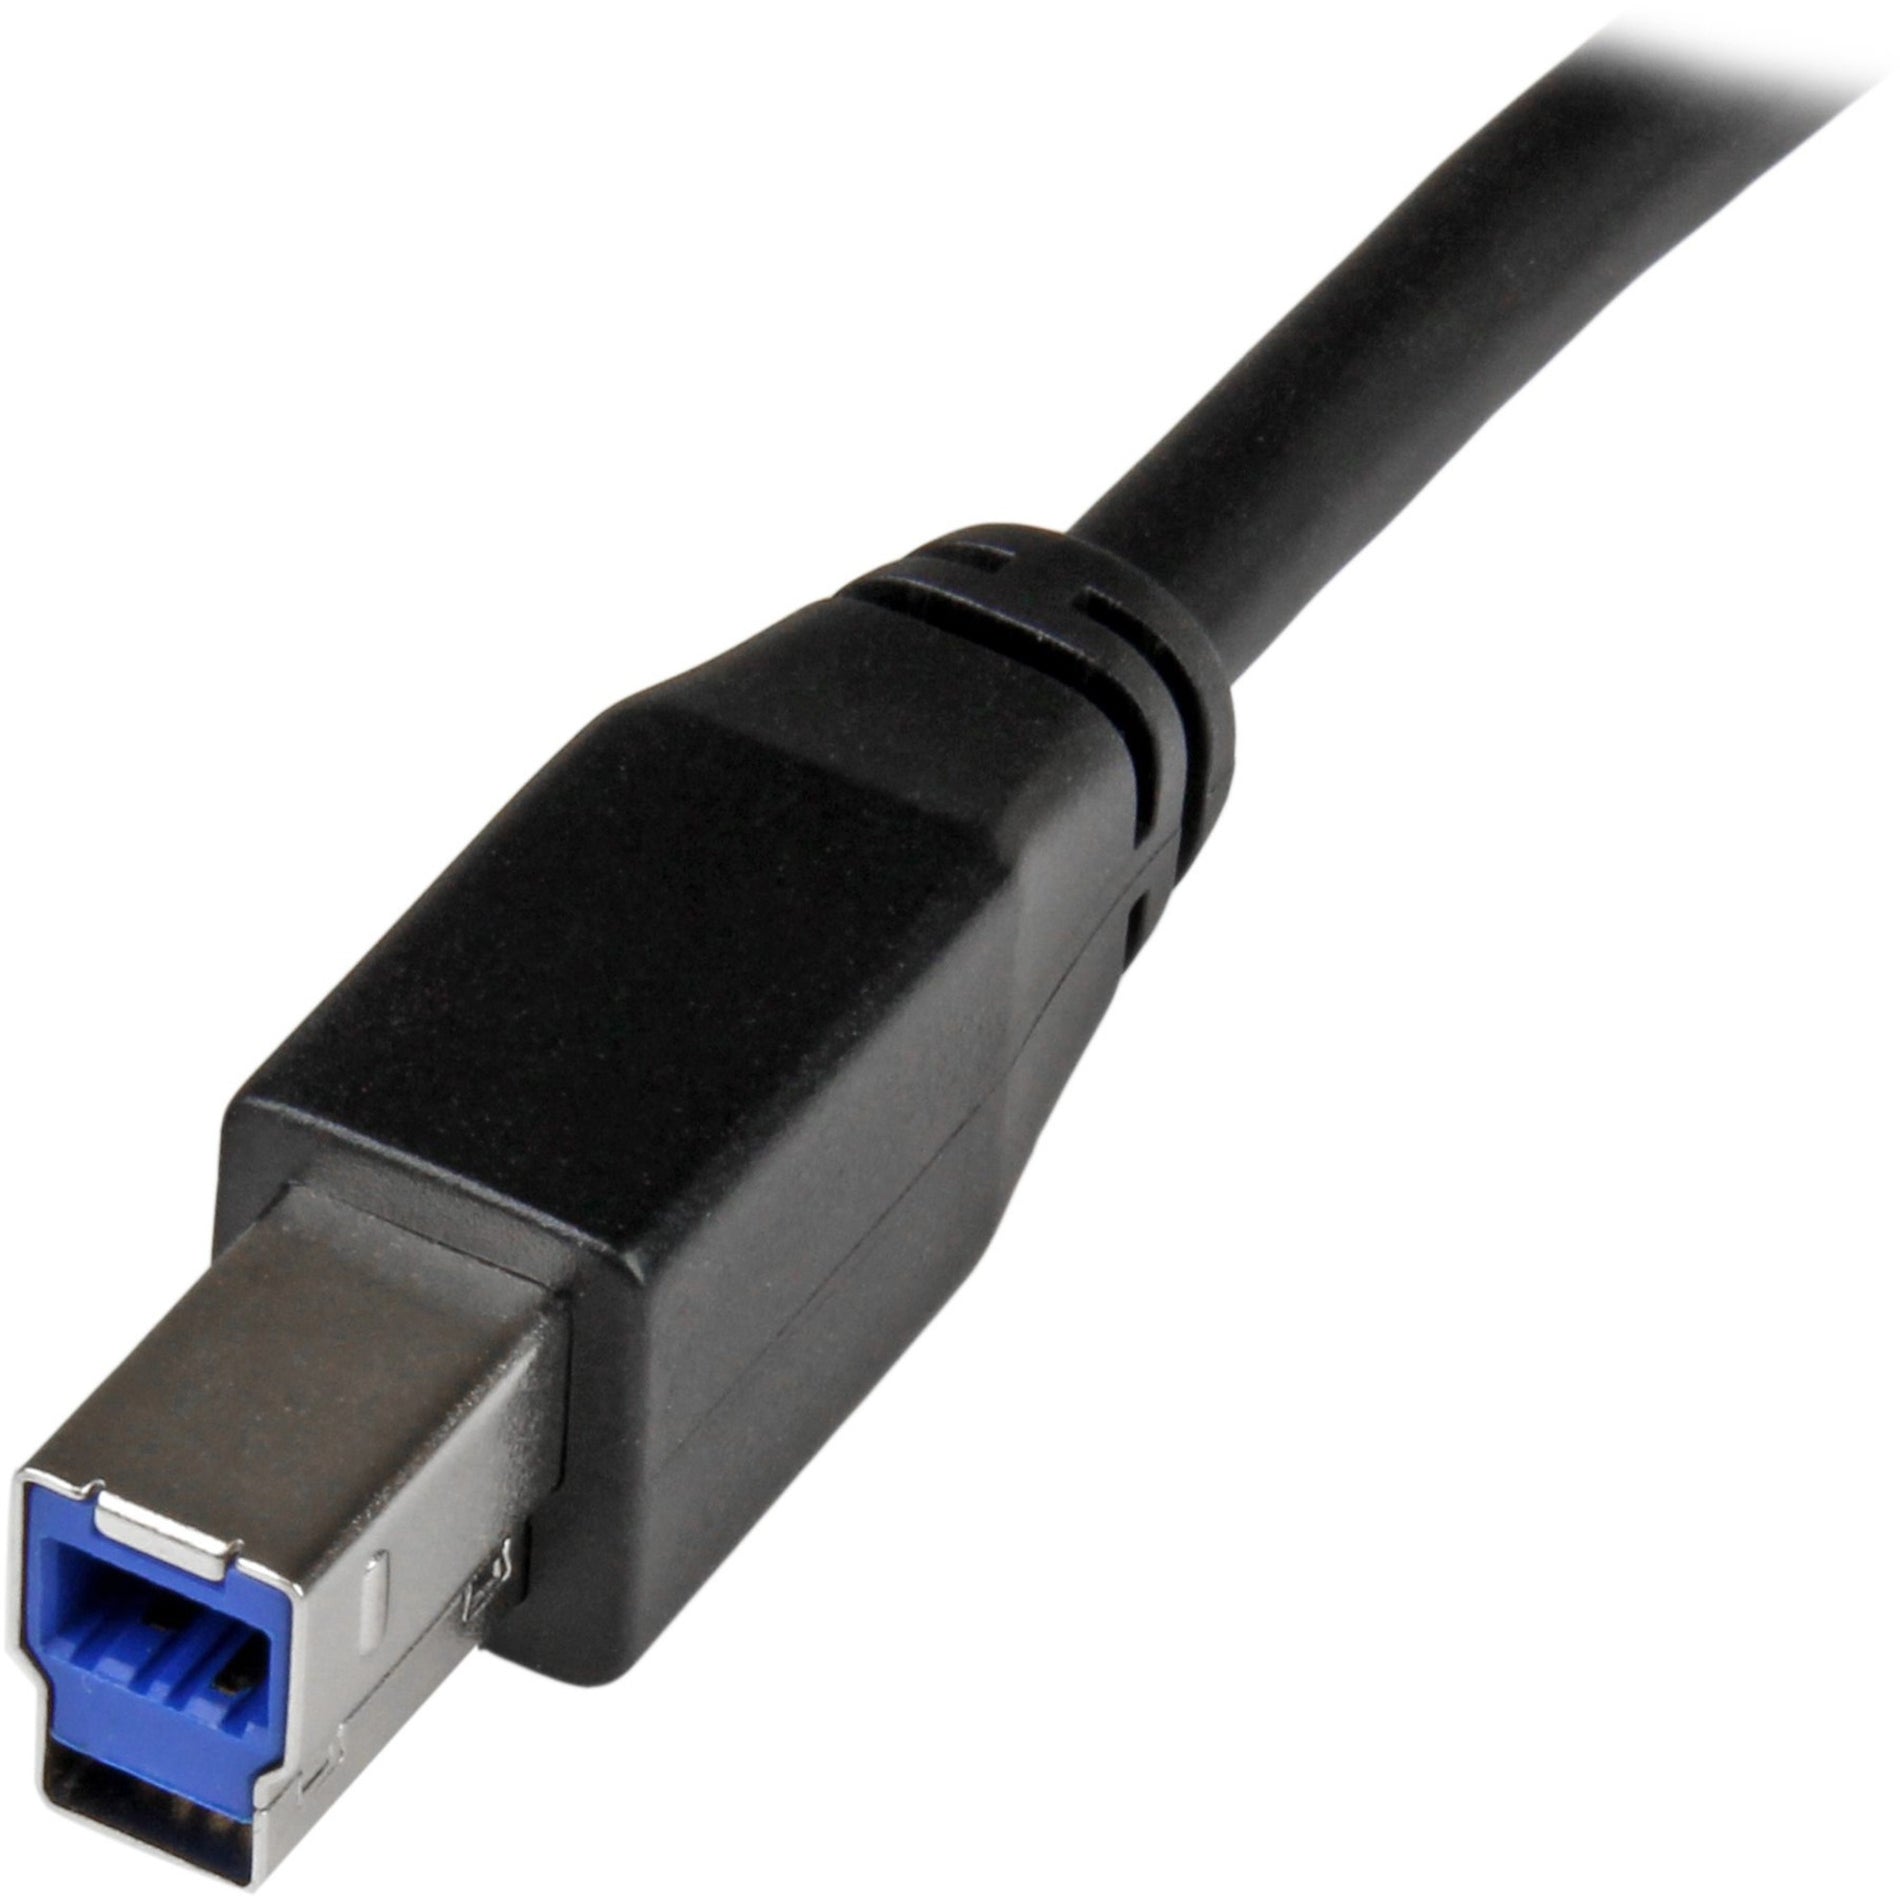 StarTech.com USB3SAB10M Active USB 3.0 USB-A to USB-B Cable - 10m, Data Transfer Cable for Hard Drive, Docking Station, Video Device